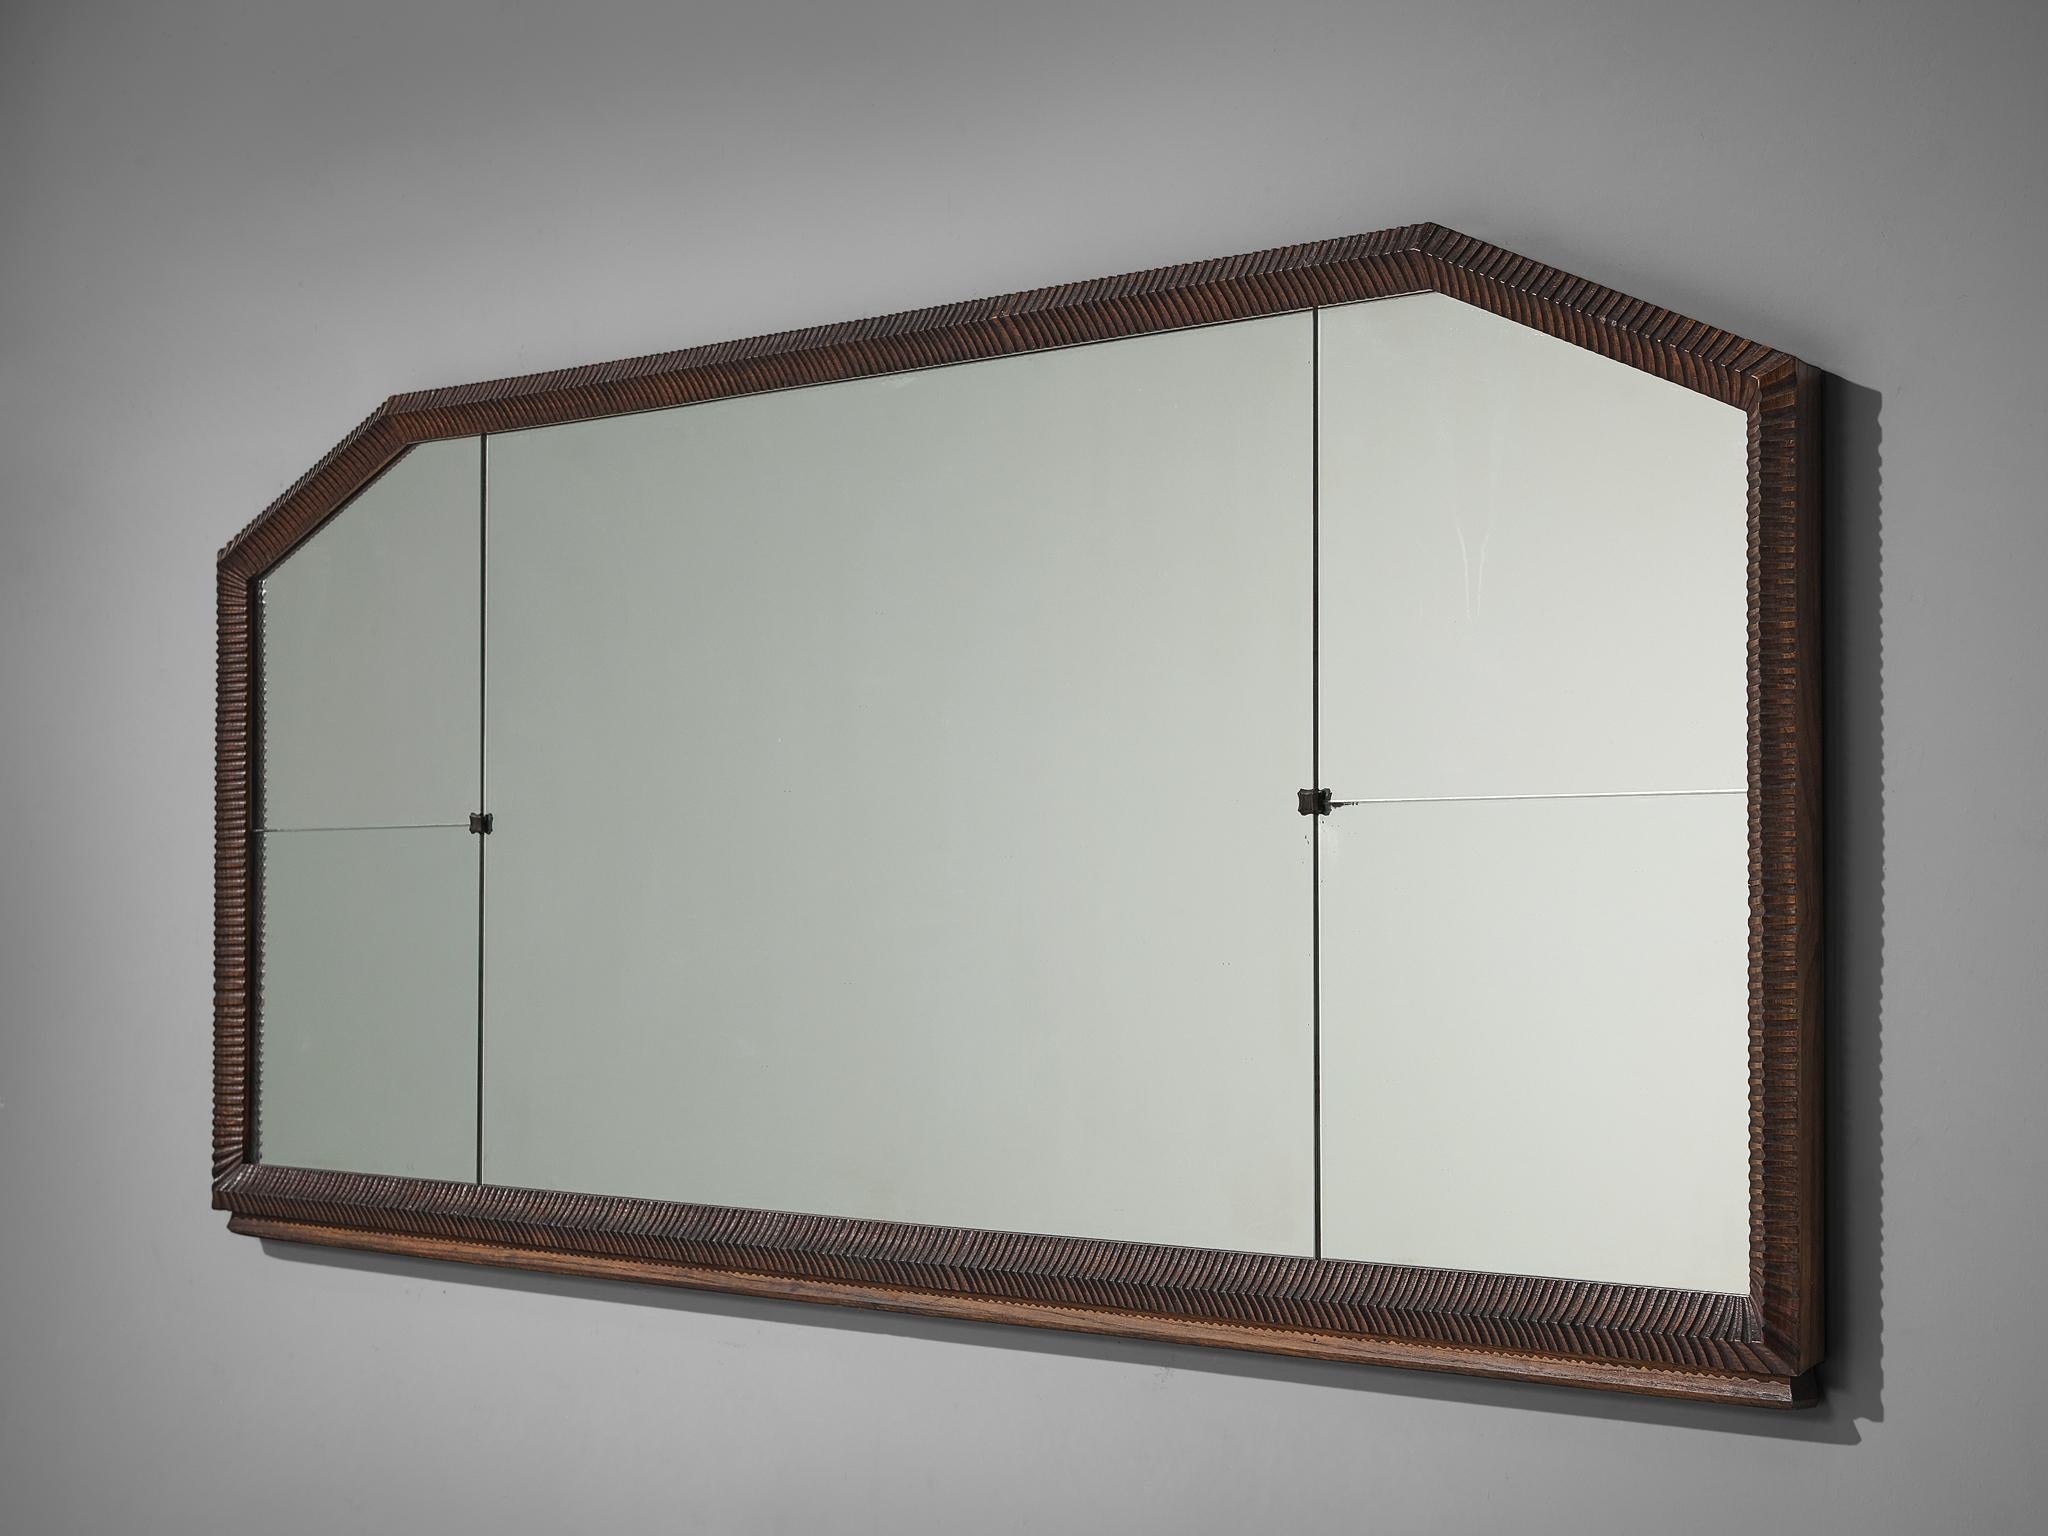 Ernesto Valabrega, console mirror, oak, metal, Italy, 1930s.

This large Art Deco mirror is designed by Ernesto Valabrega and can be placed on top of a sideboard or adjusted to a wall. The application of this elegant piece of furniture is a clever